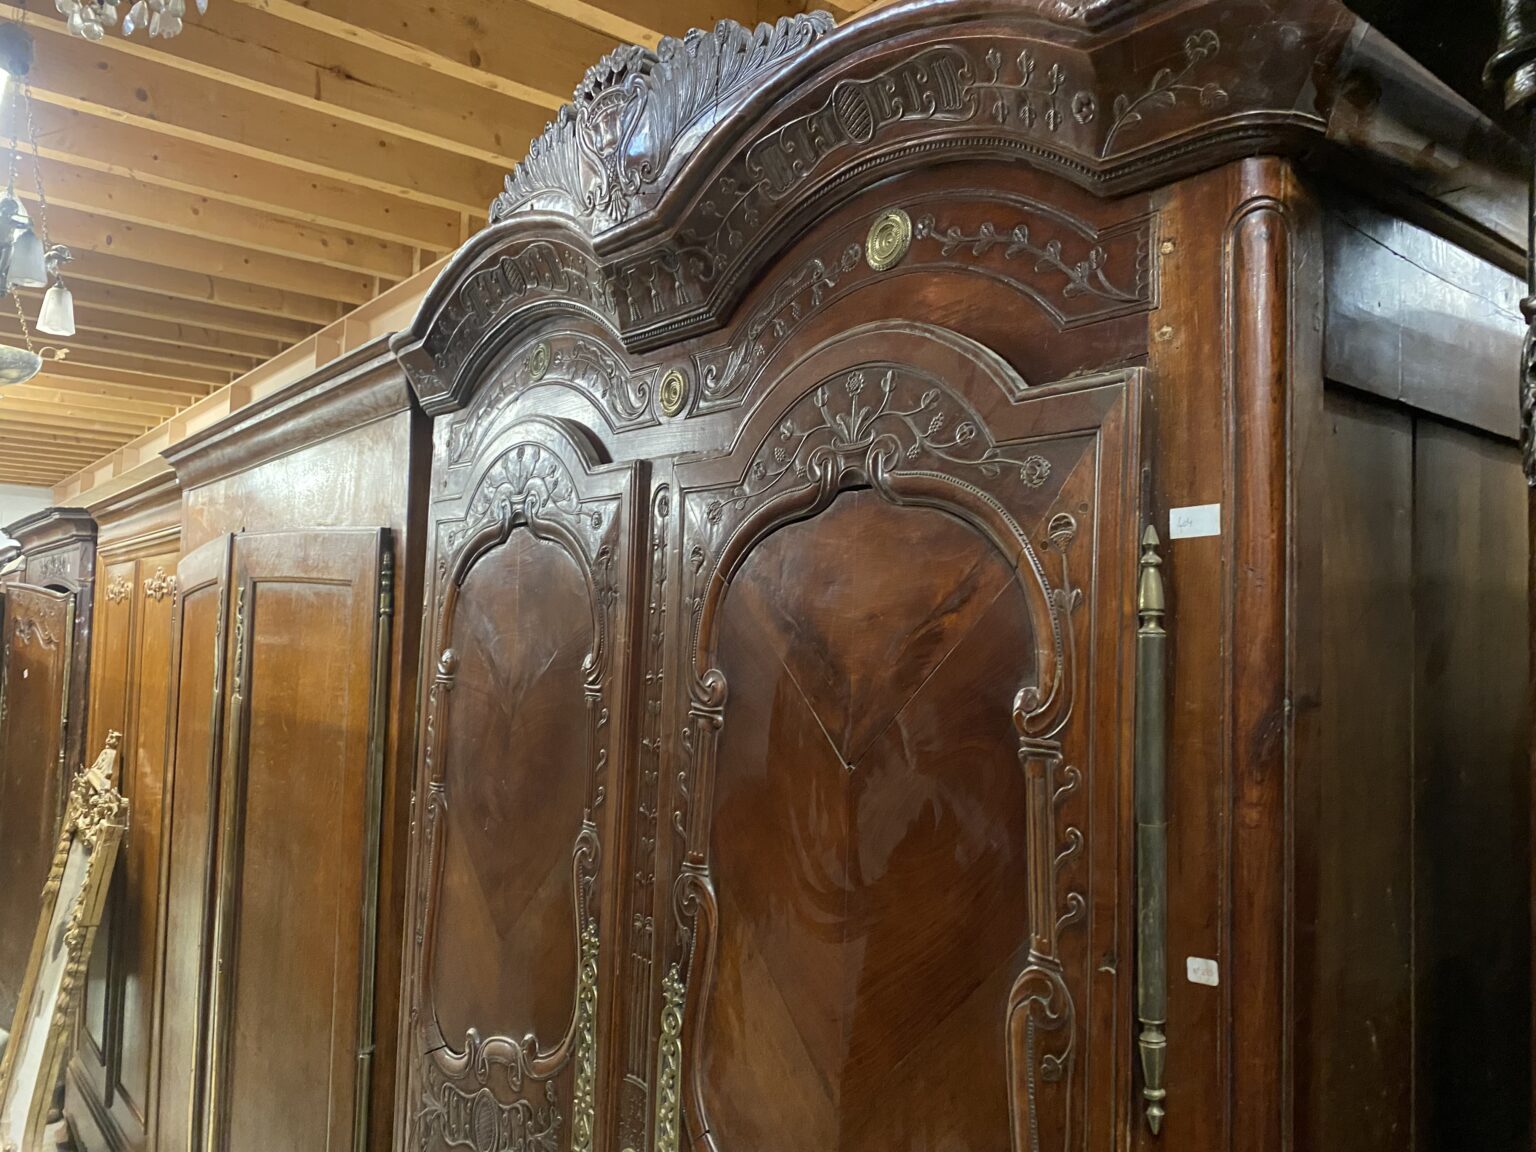 French Rennes Cherrywood Armoire. Beautiful Floral and Vine decoration with original brass escutcheons and side panels. Dated 1838